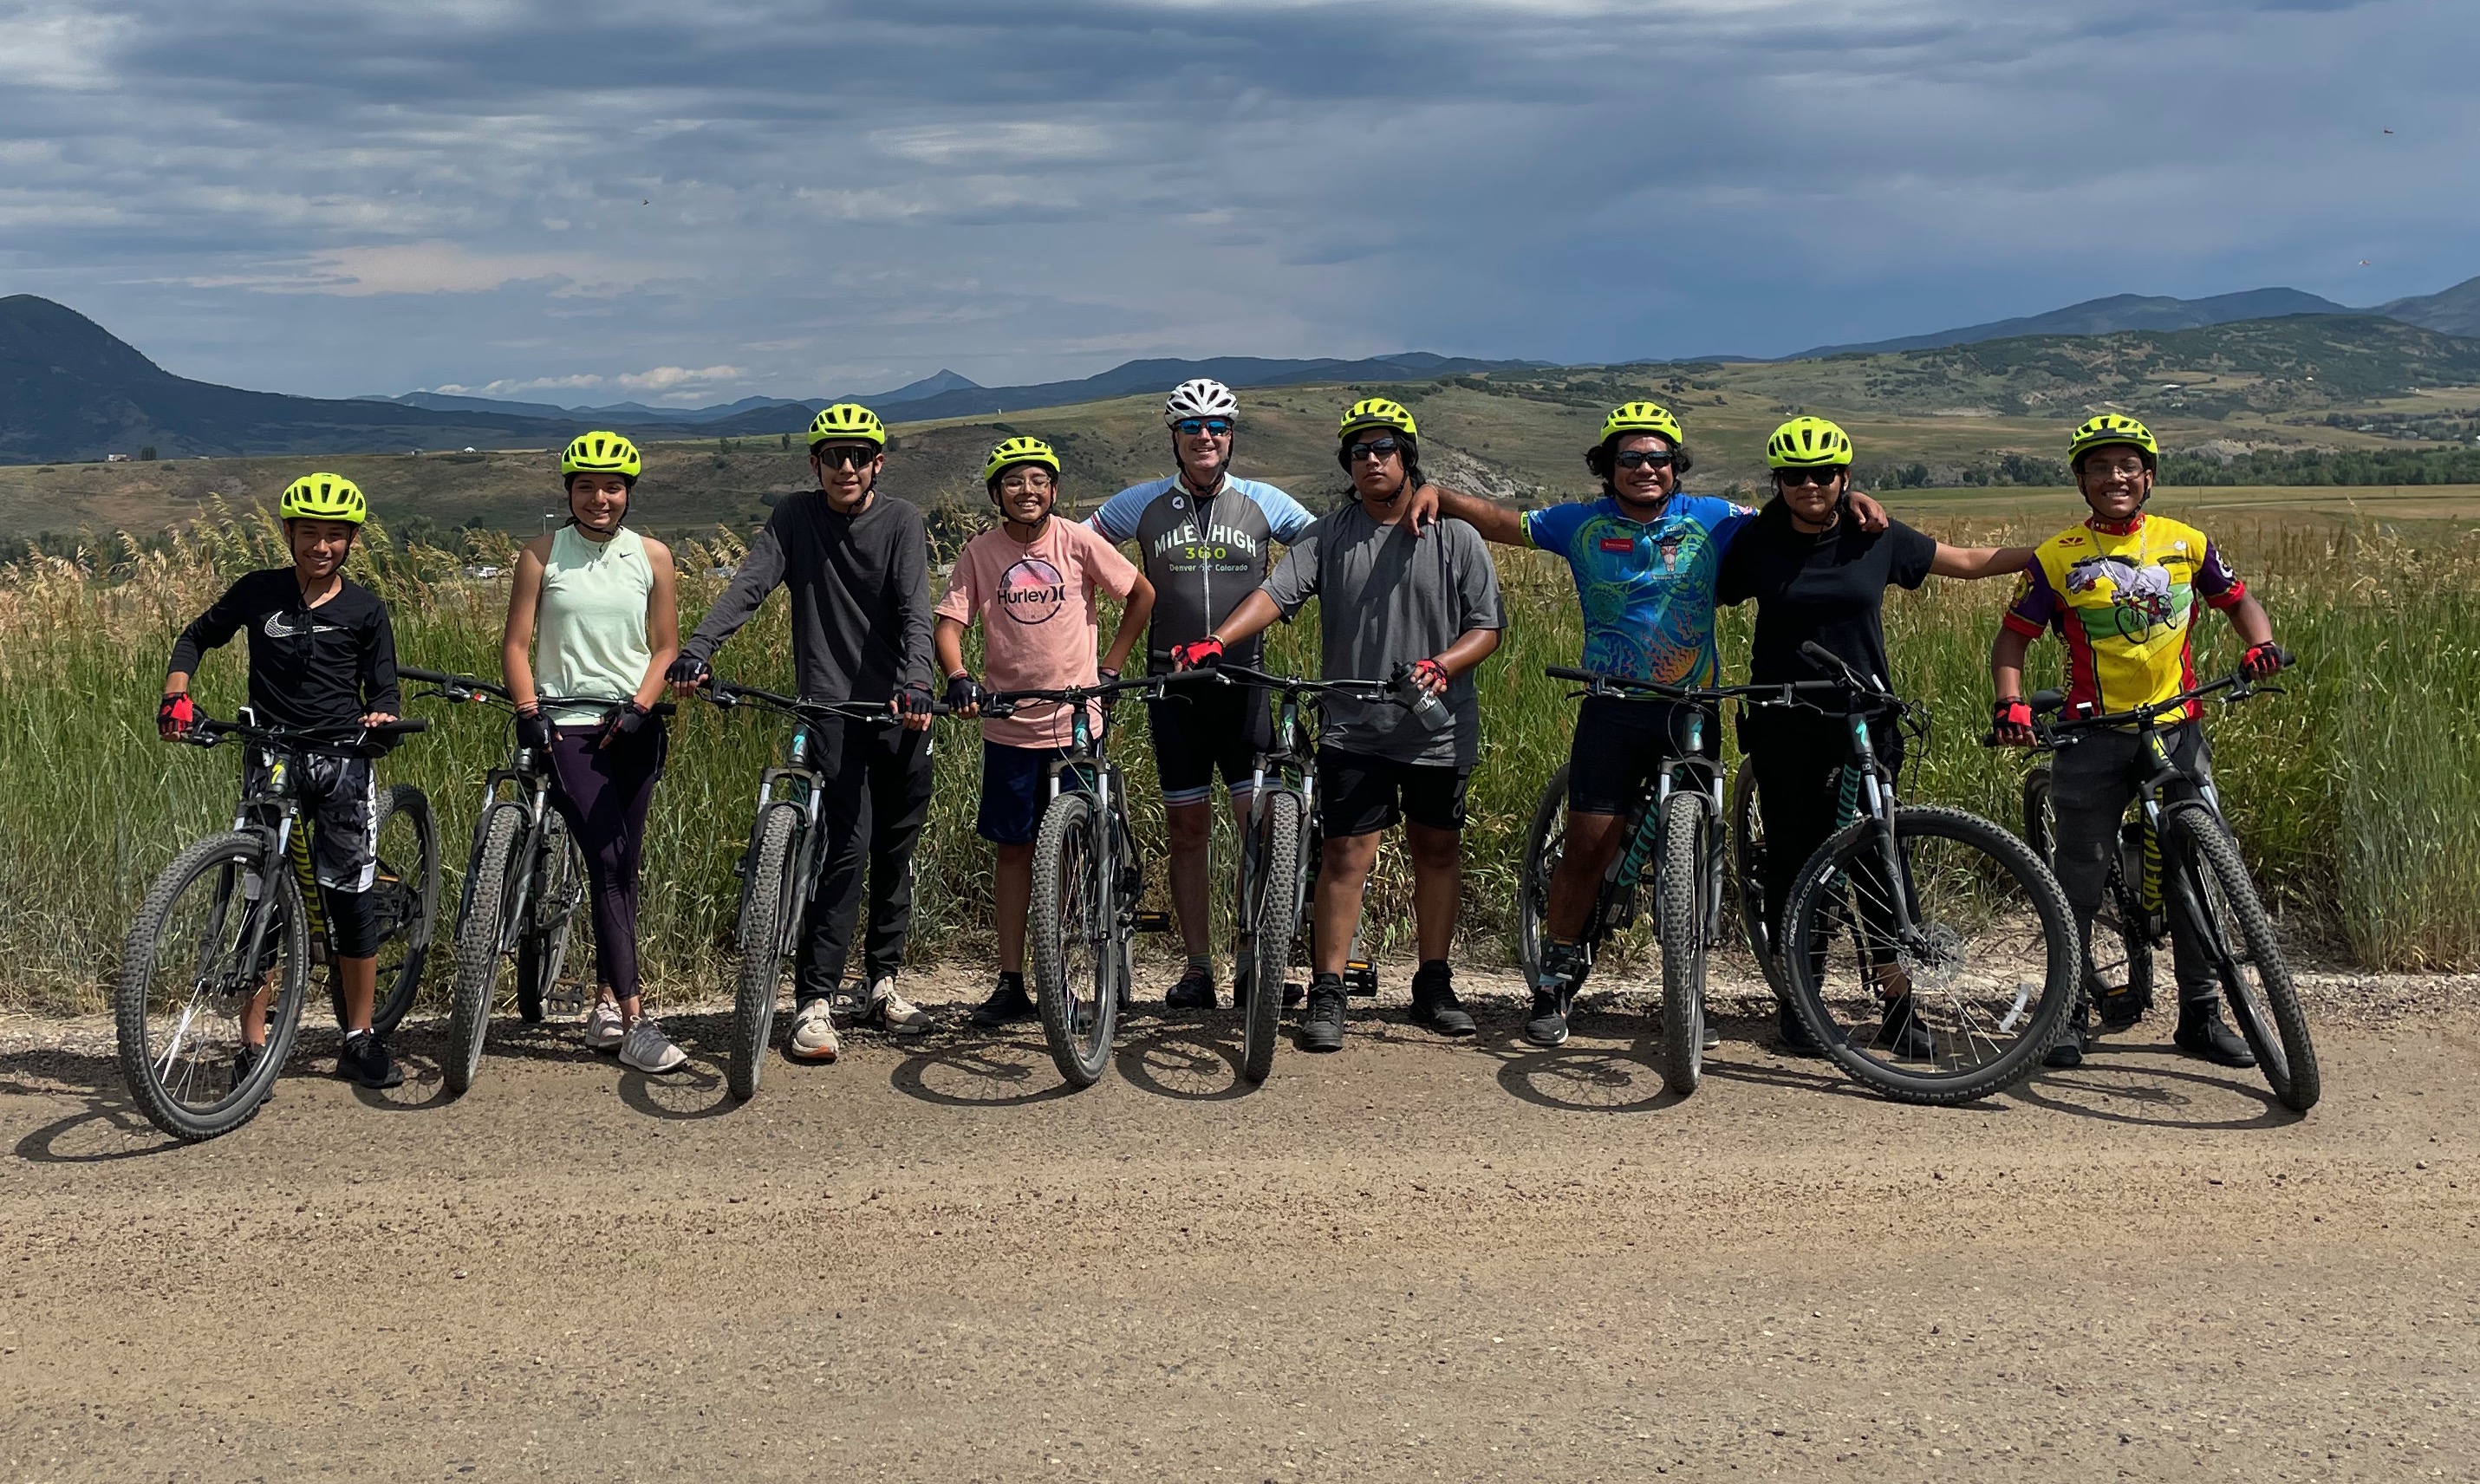 I was in Steamboat Springs with some students on a training ride